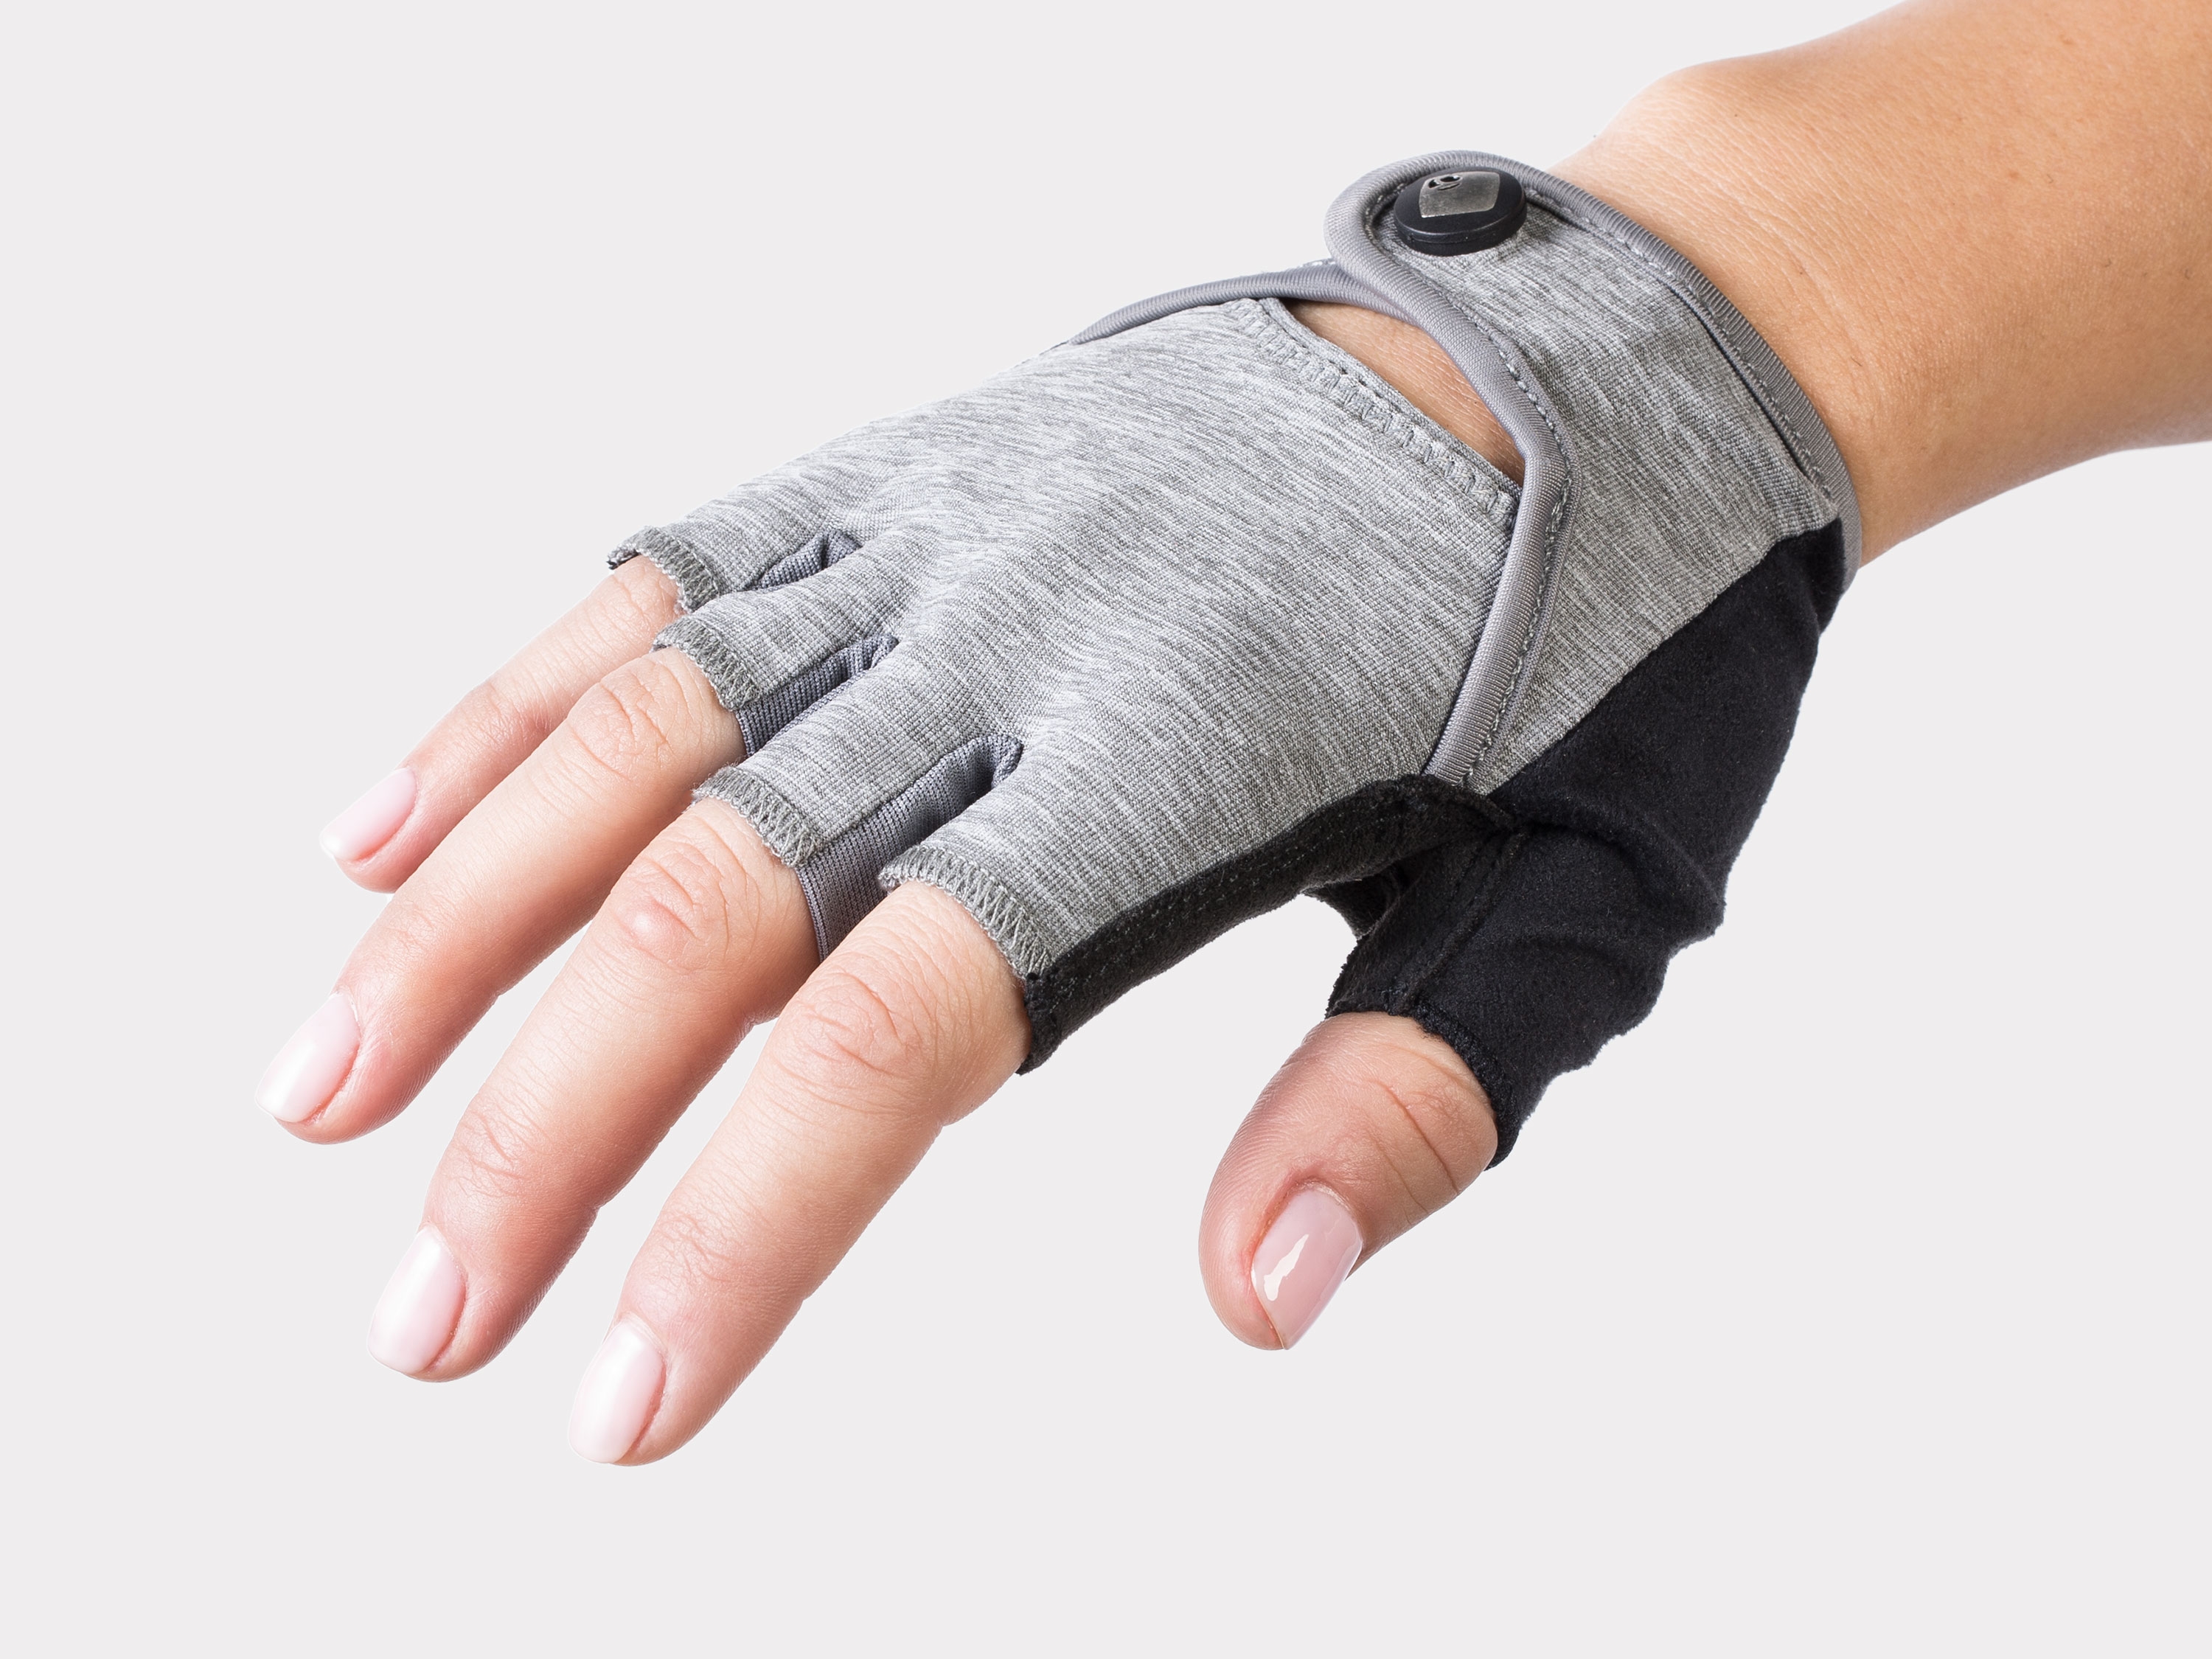 bontrager women's cycling gloves